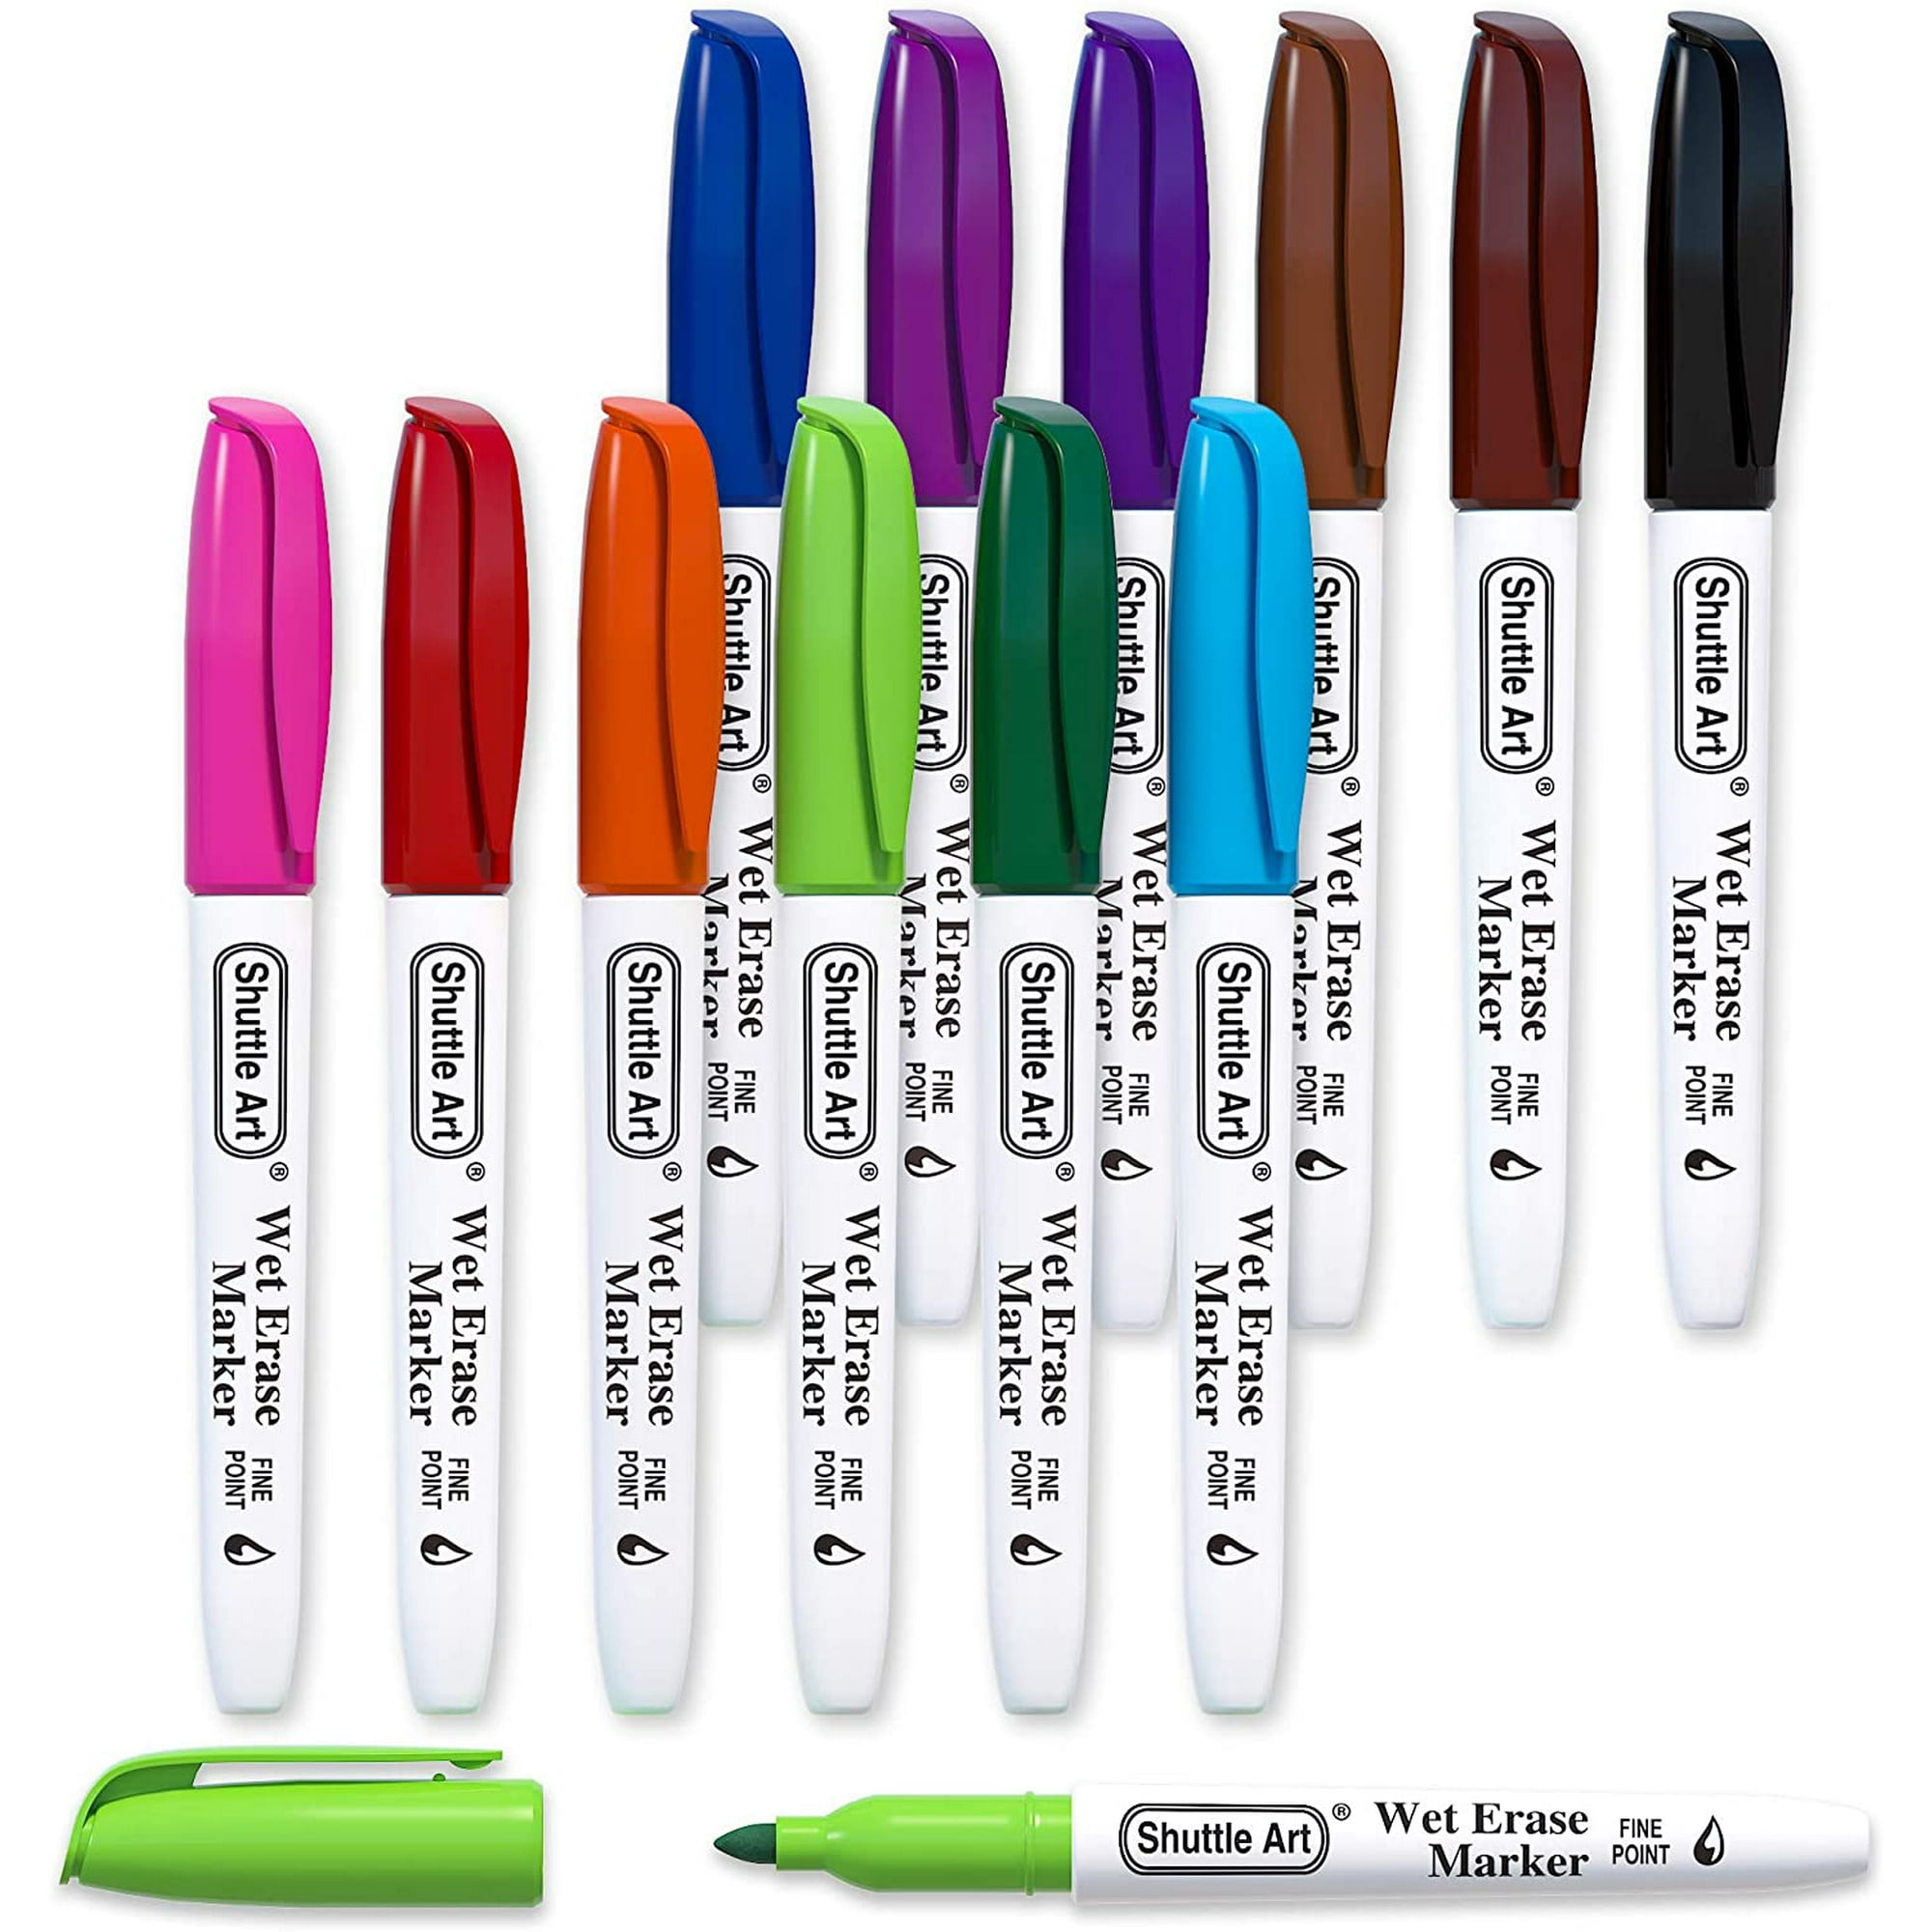 jury bind Hotellet Wet Erase Markers, 12 Colors Fine Tip Overhead Transparency Smudge-Free  Markers, Workers for Laminated Calendars Whiteboard Schedule Glass and Any  Kind of Wet Erase Surface,Wipe with water | Walmart Canada